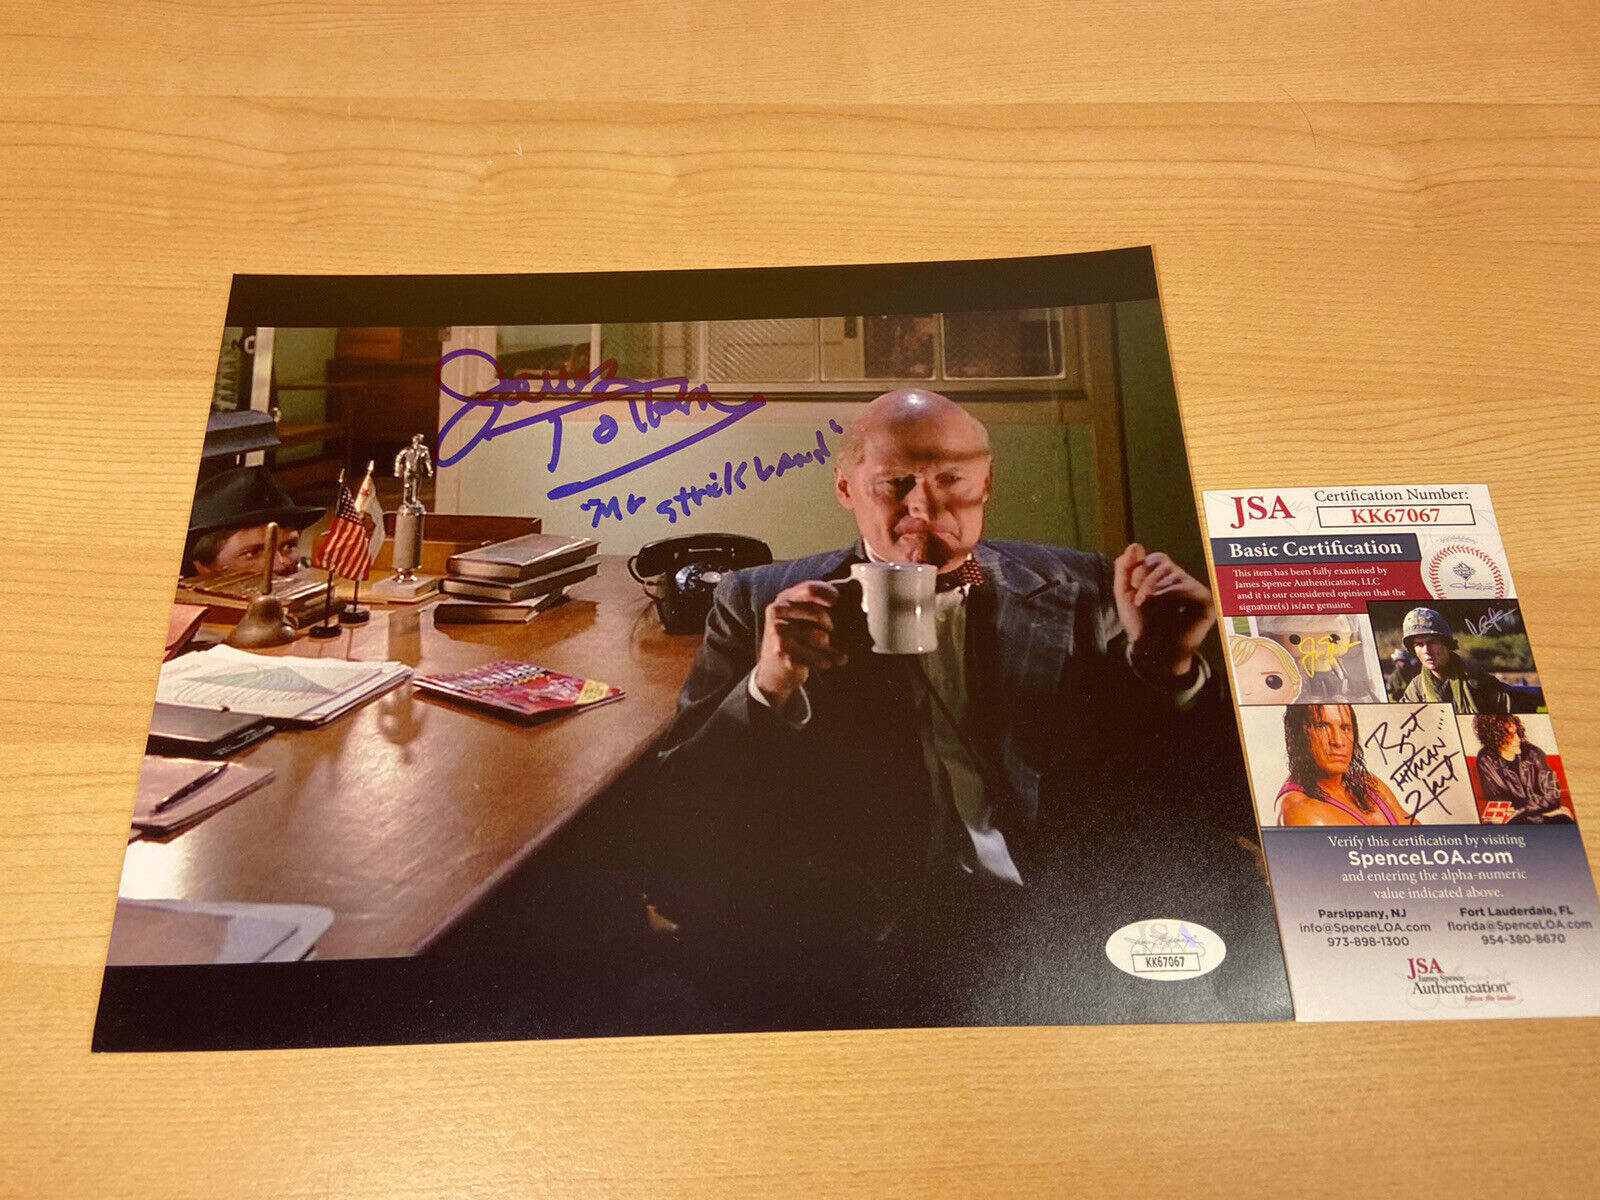 James Tolkan back to the future BTTF Autographed Signed 8X10 Photo Poster painting JSA COA